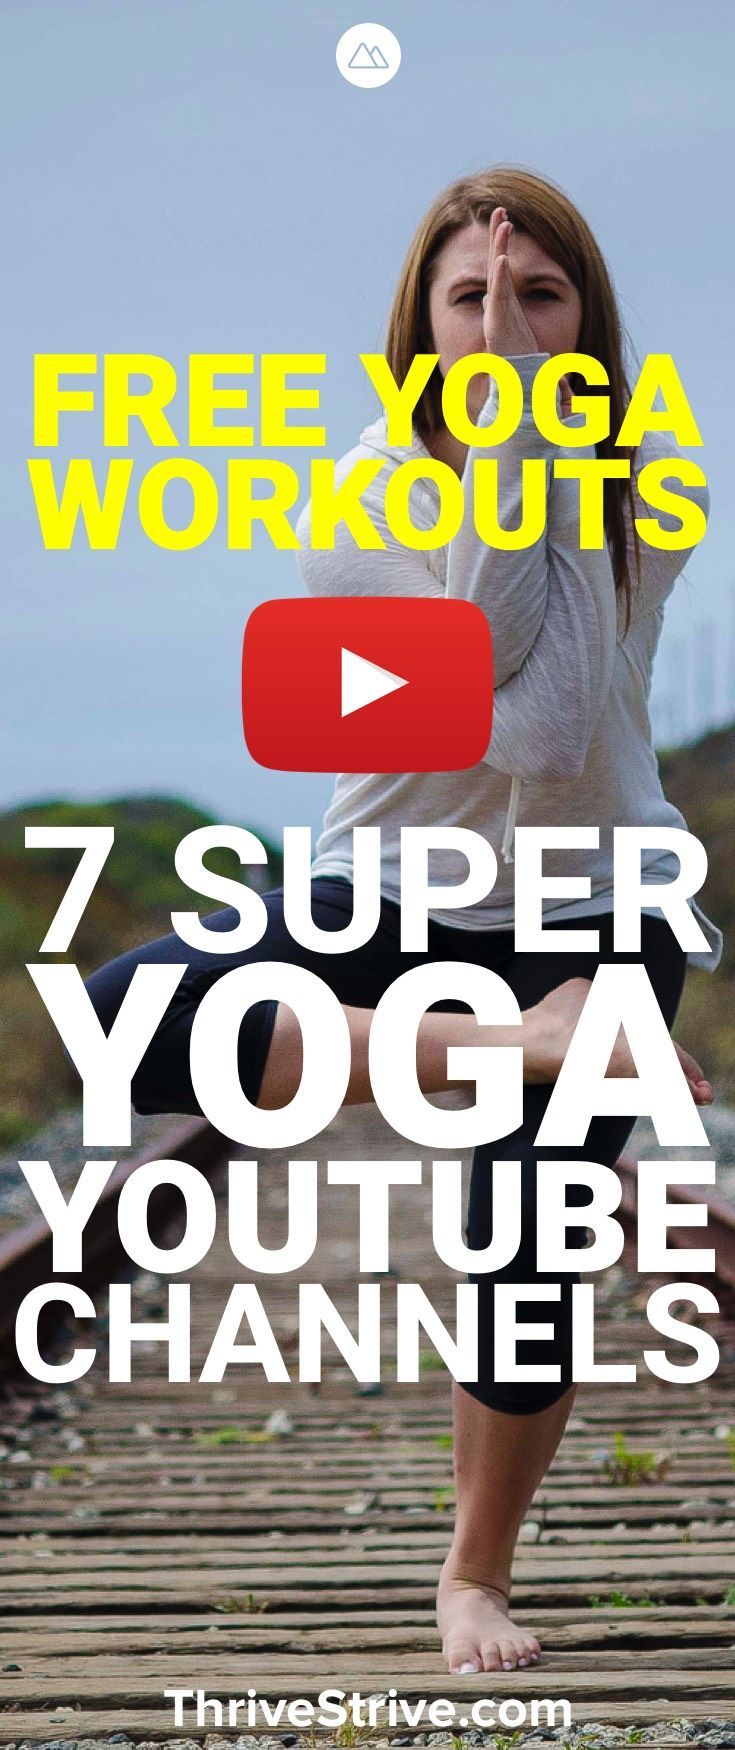 Looking to get started with yoga? Here are 7 awesome youtube channels that are g...